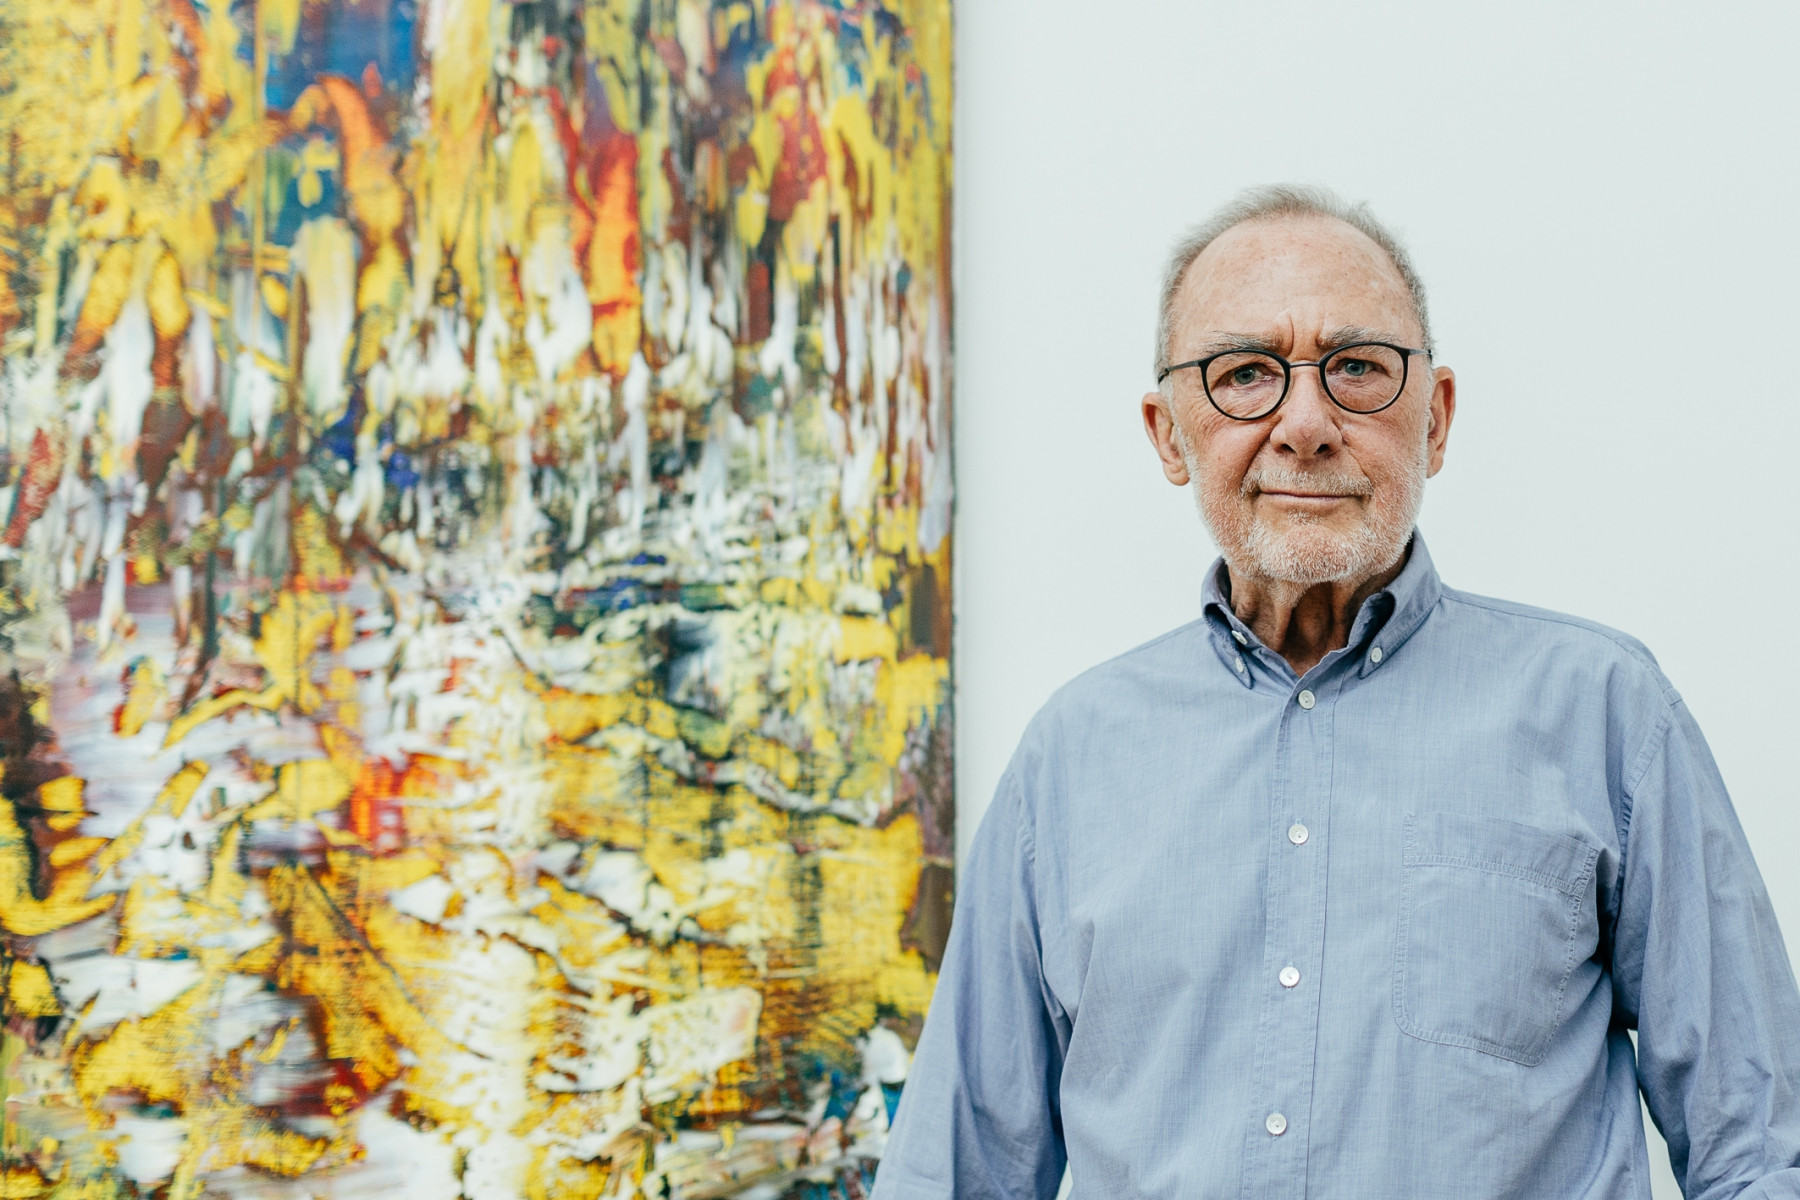 The Importance of Craftsmanship: A. Lange & Söhne suppors the exhibition “Gerhard Richter Overpainted Photographs” 